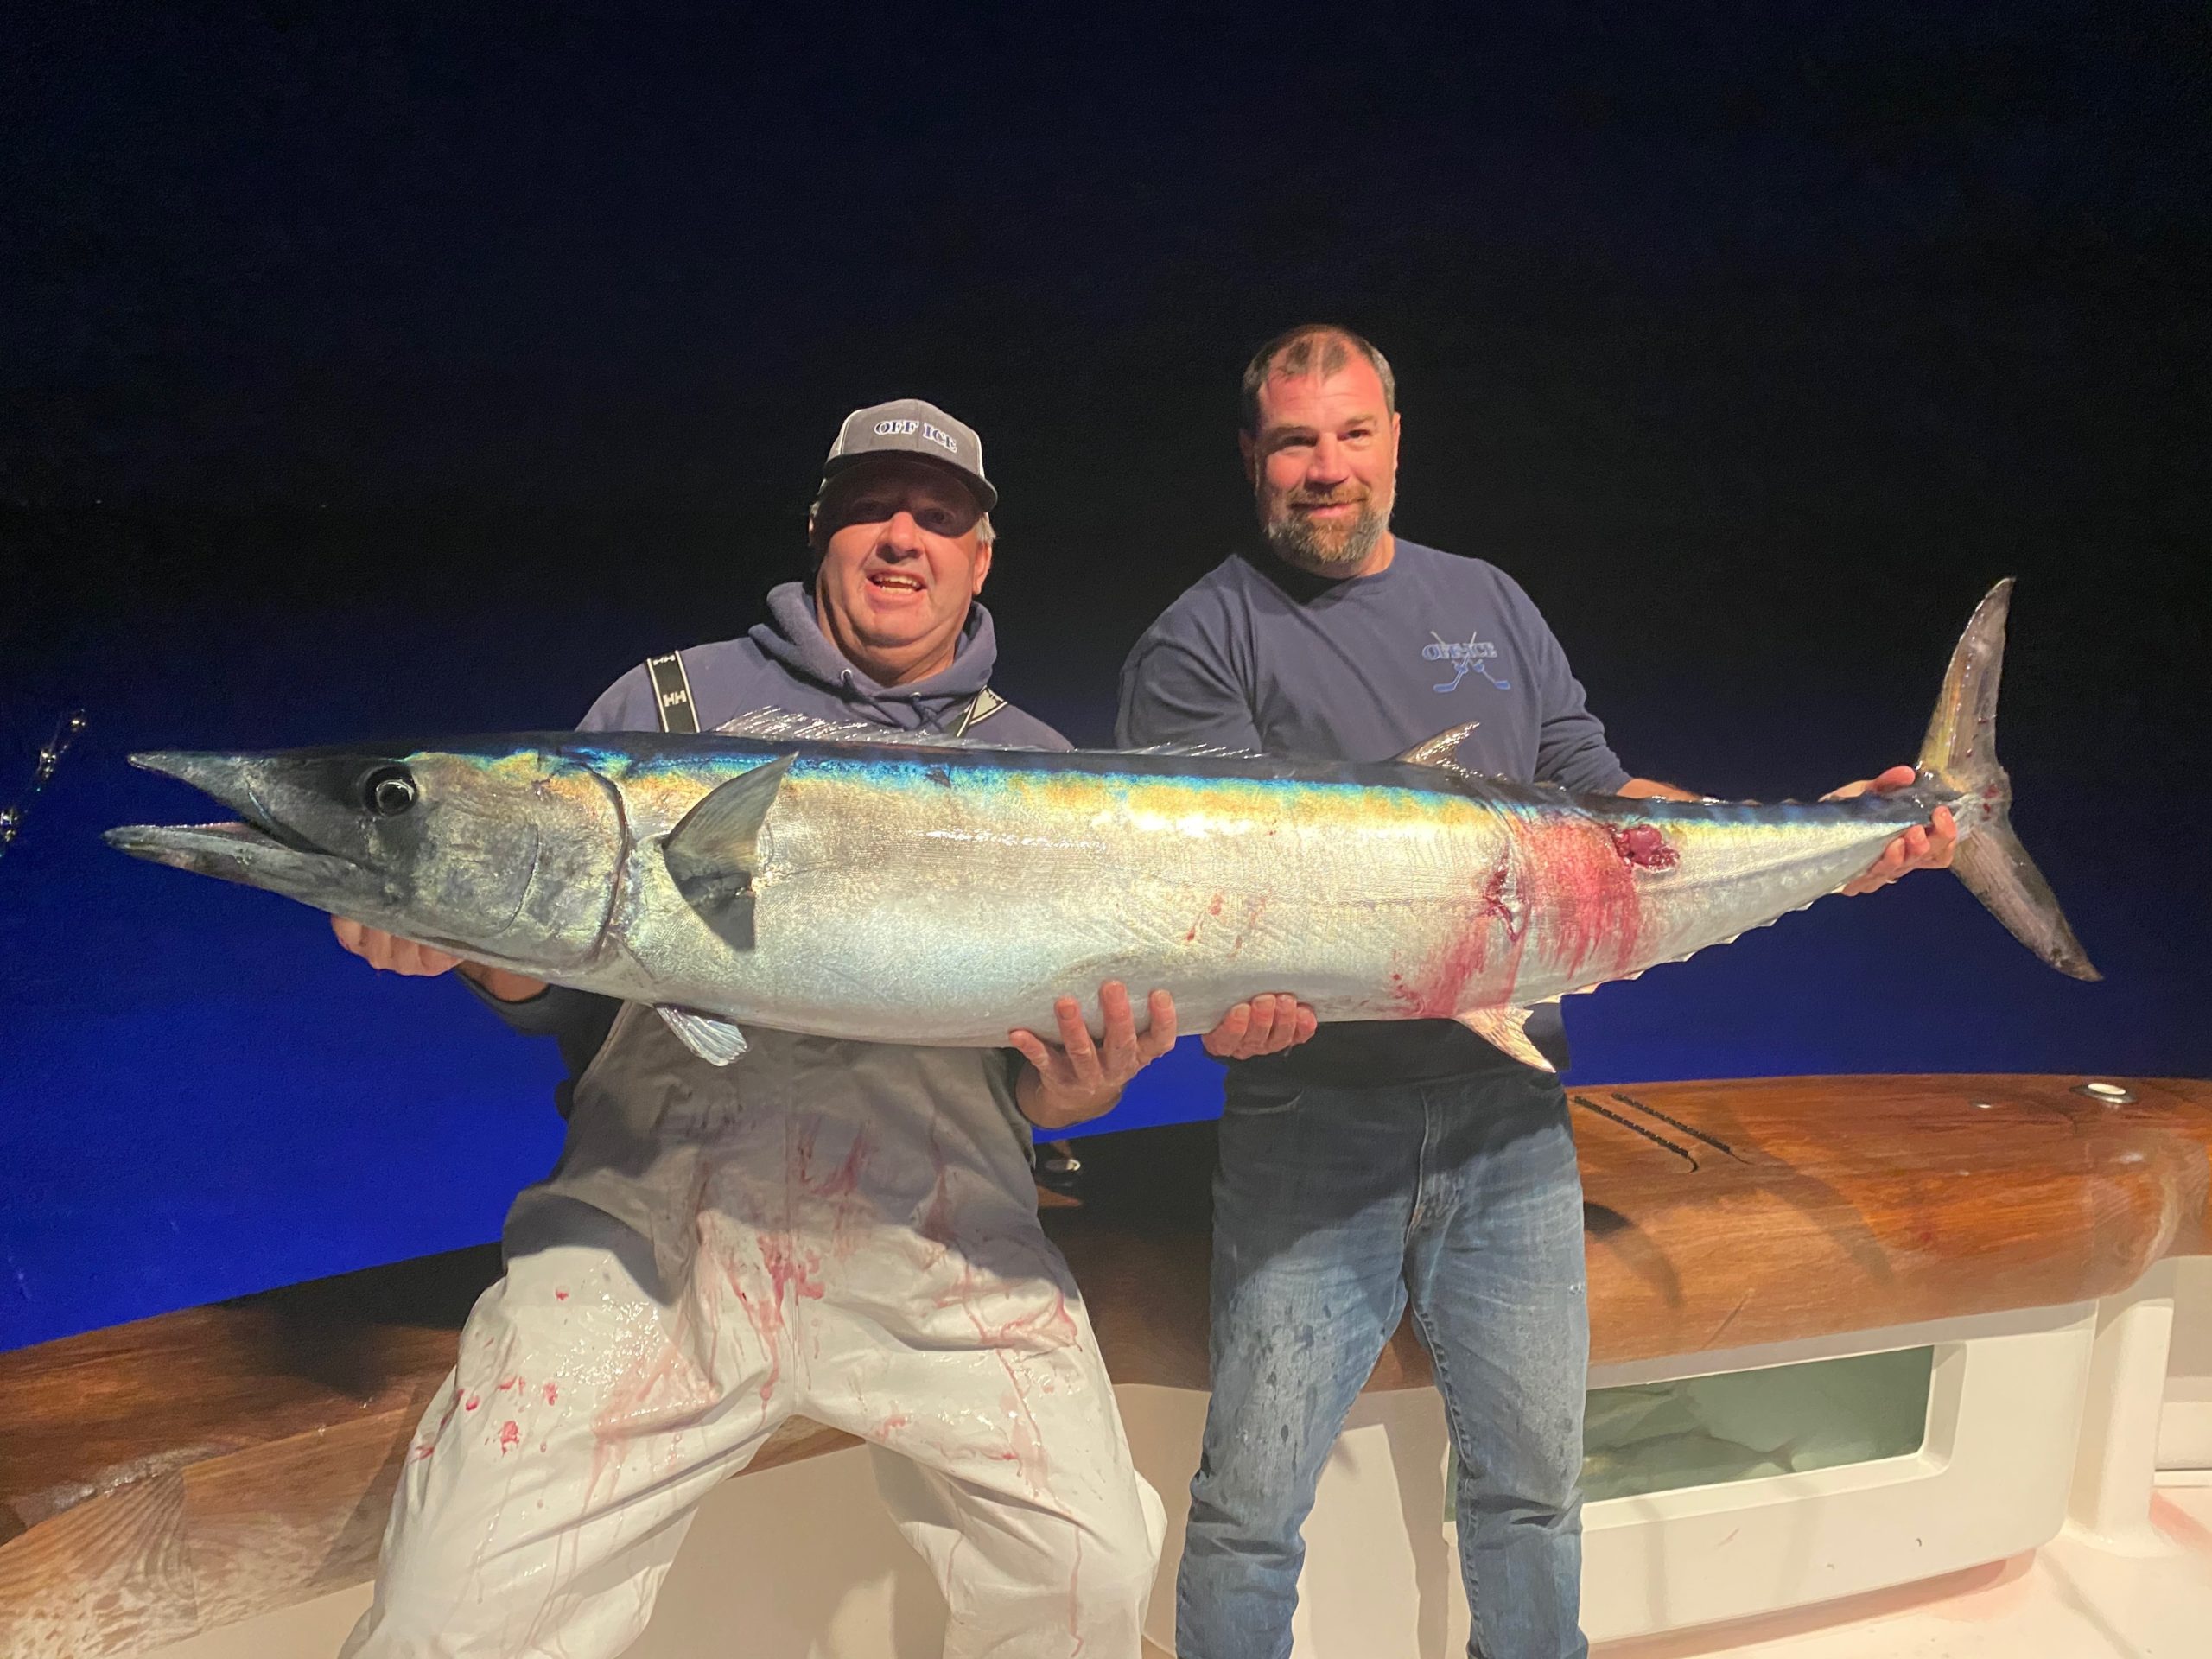 Brad Allecia and Capt. Billy O'Sullivan caught this 73-inch wahoo while fishing the canyons off Montauk on October 3 aboard the Off-Ice.